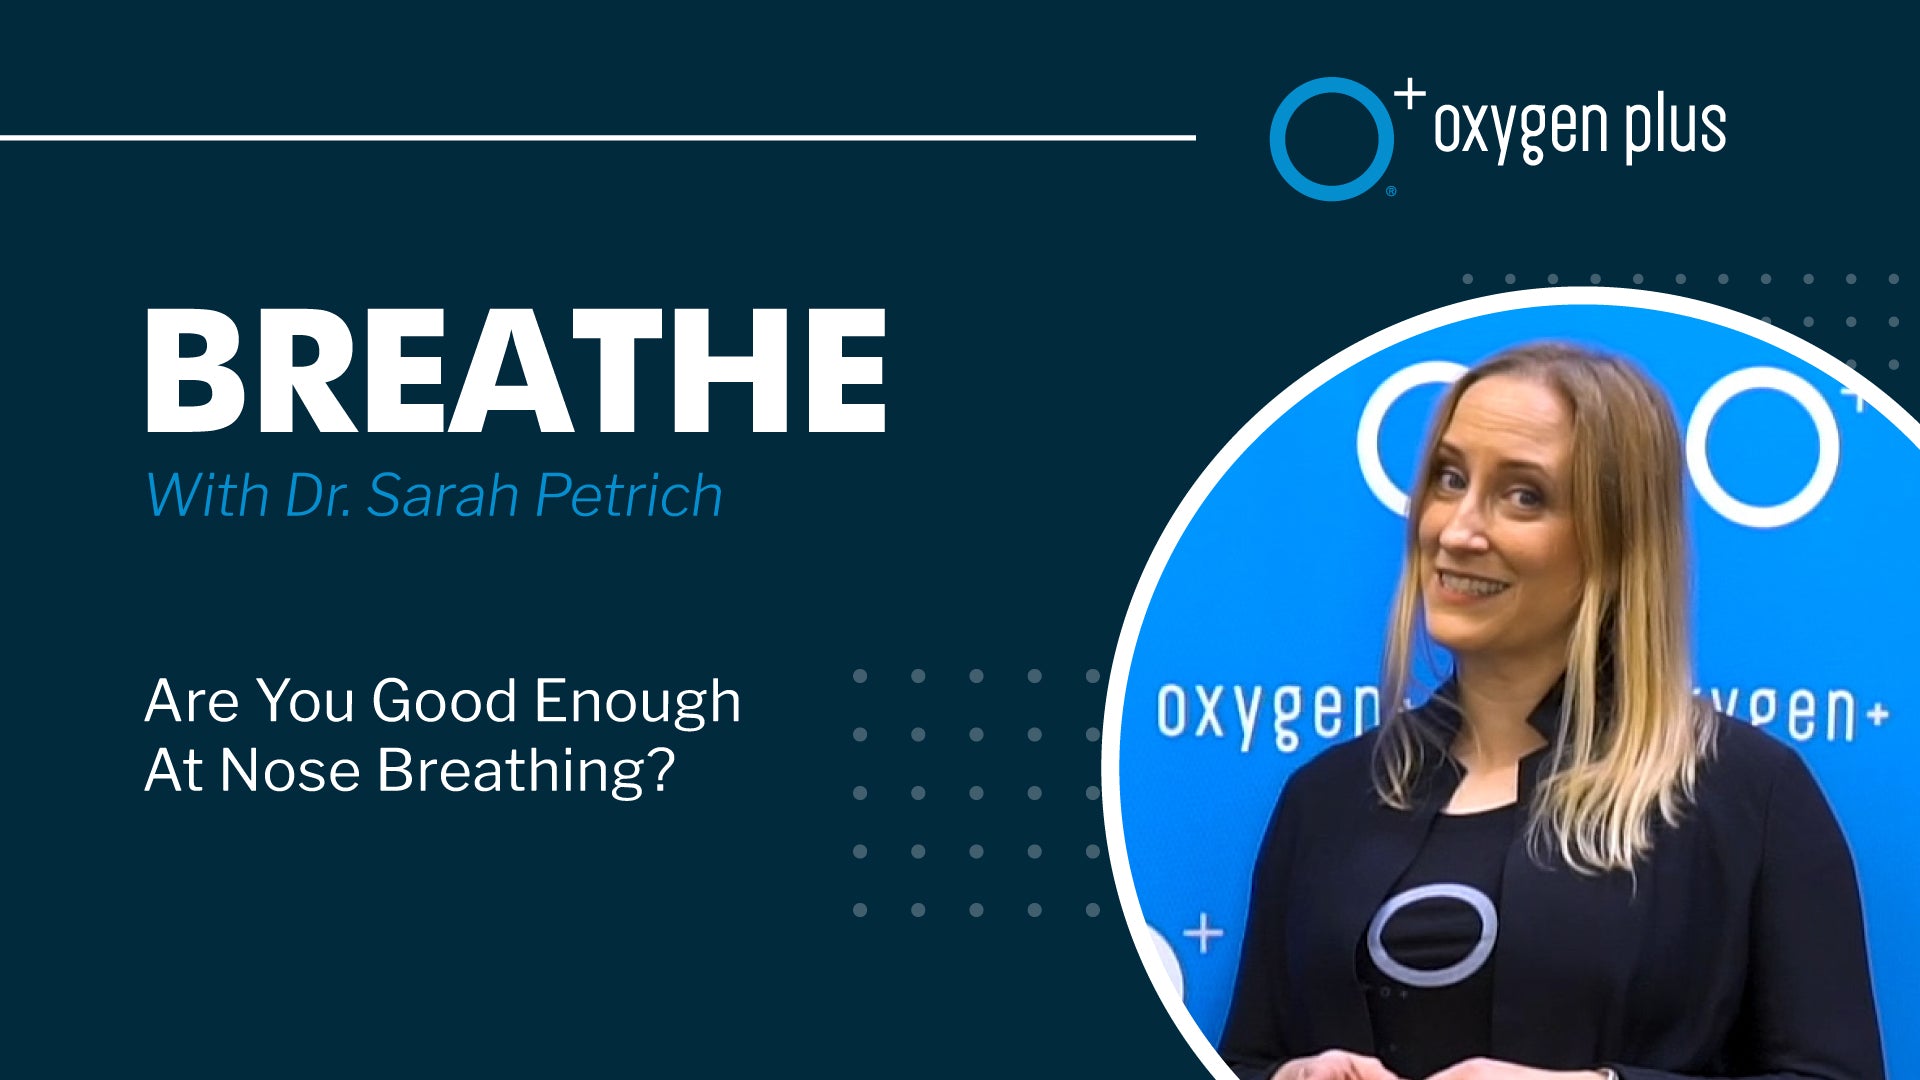 Breathing Series: "Are You Good Enough At Nose Breathing?" with Dr. Sarah Petrich